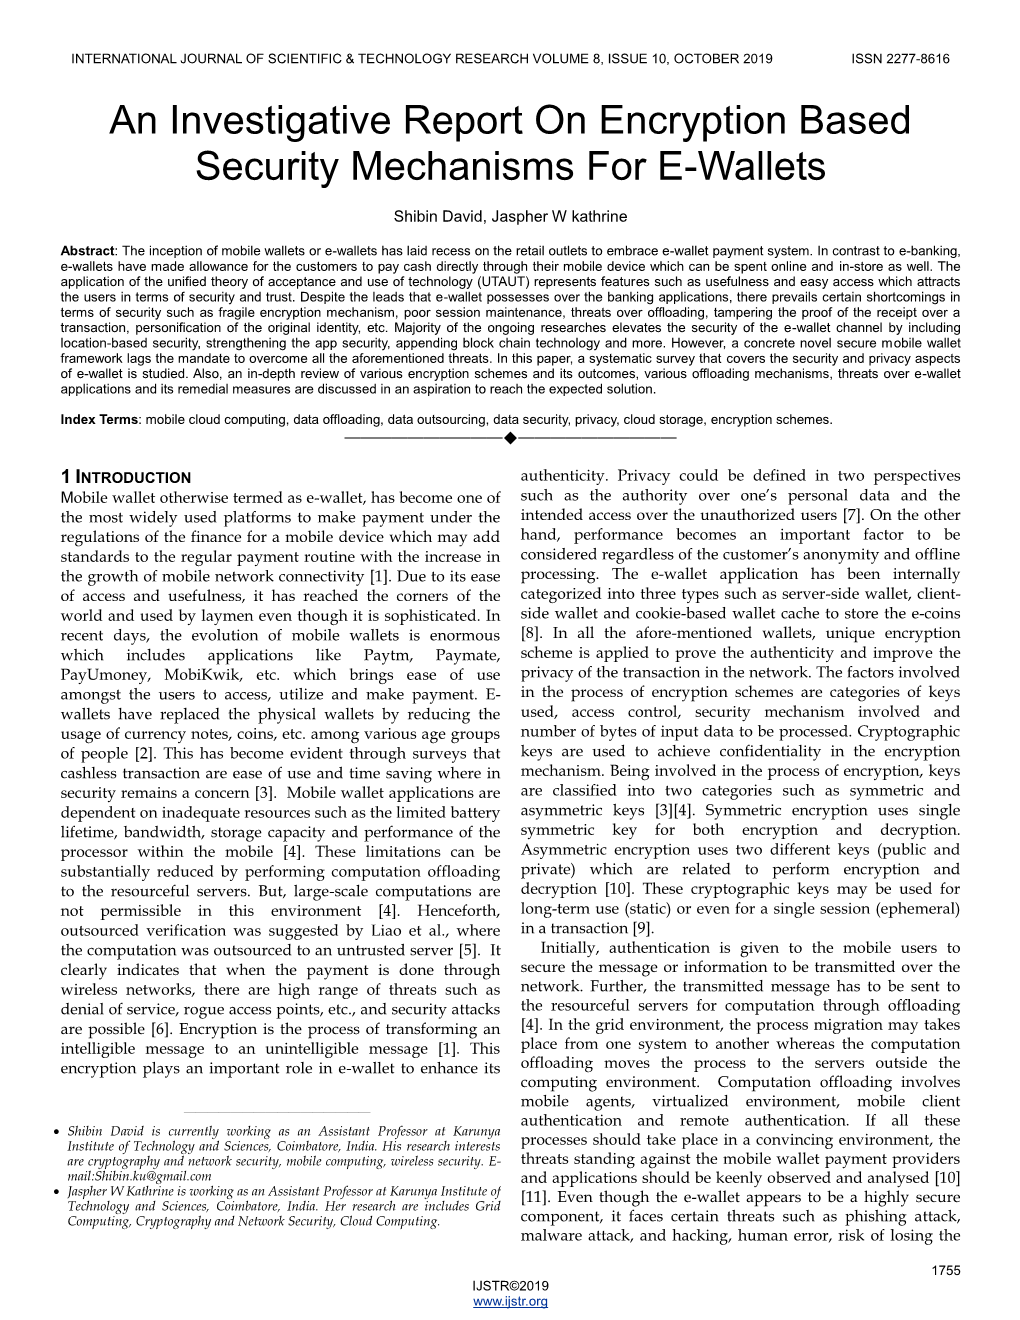 An Investigative Report on Encryption Based Security Mechanisms for E-Wallets